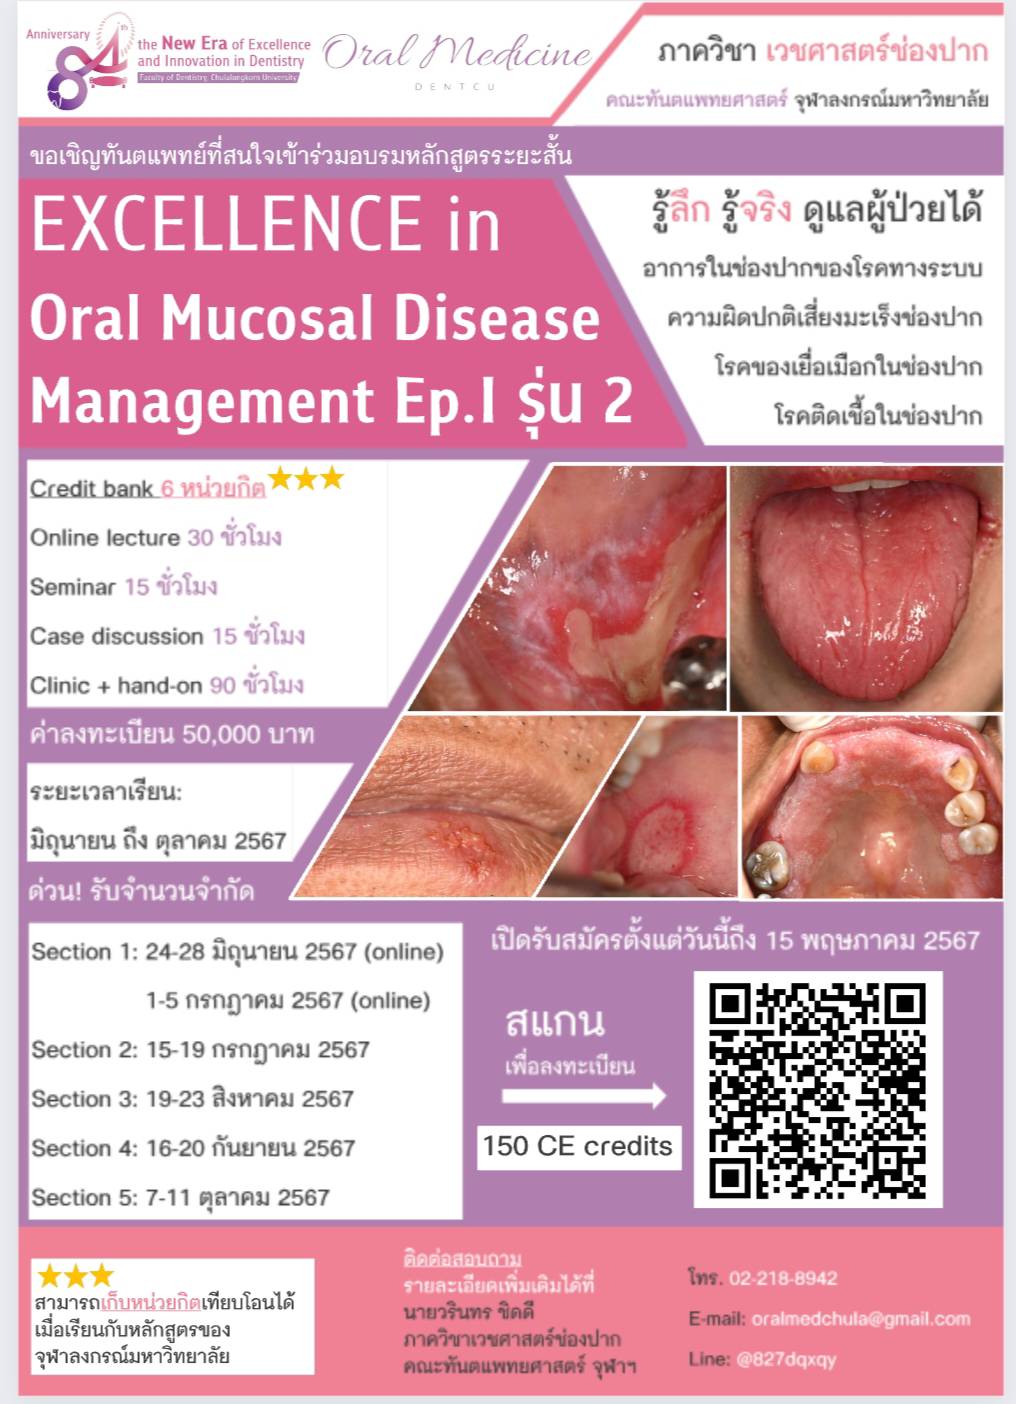 Excellence in oral mucosal disease management Ep. I รุ่นที่ 2